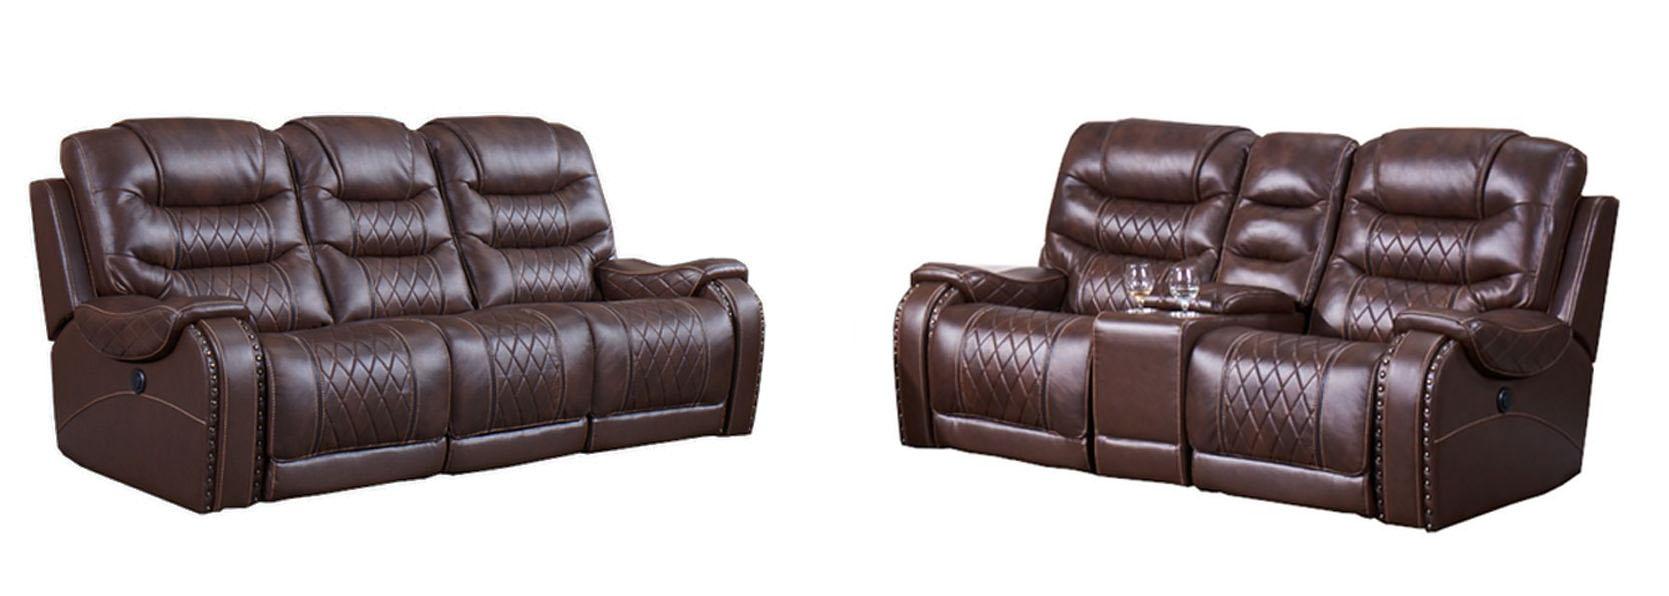 Contemporary Reclining Set SF1350 SF1350-2PC in Dark Brown Leather Air Material